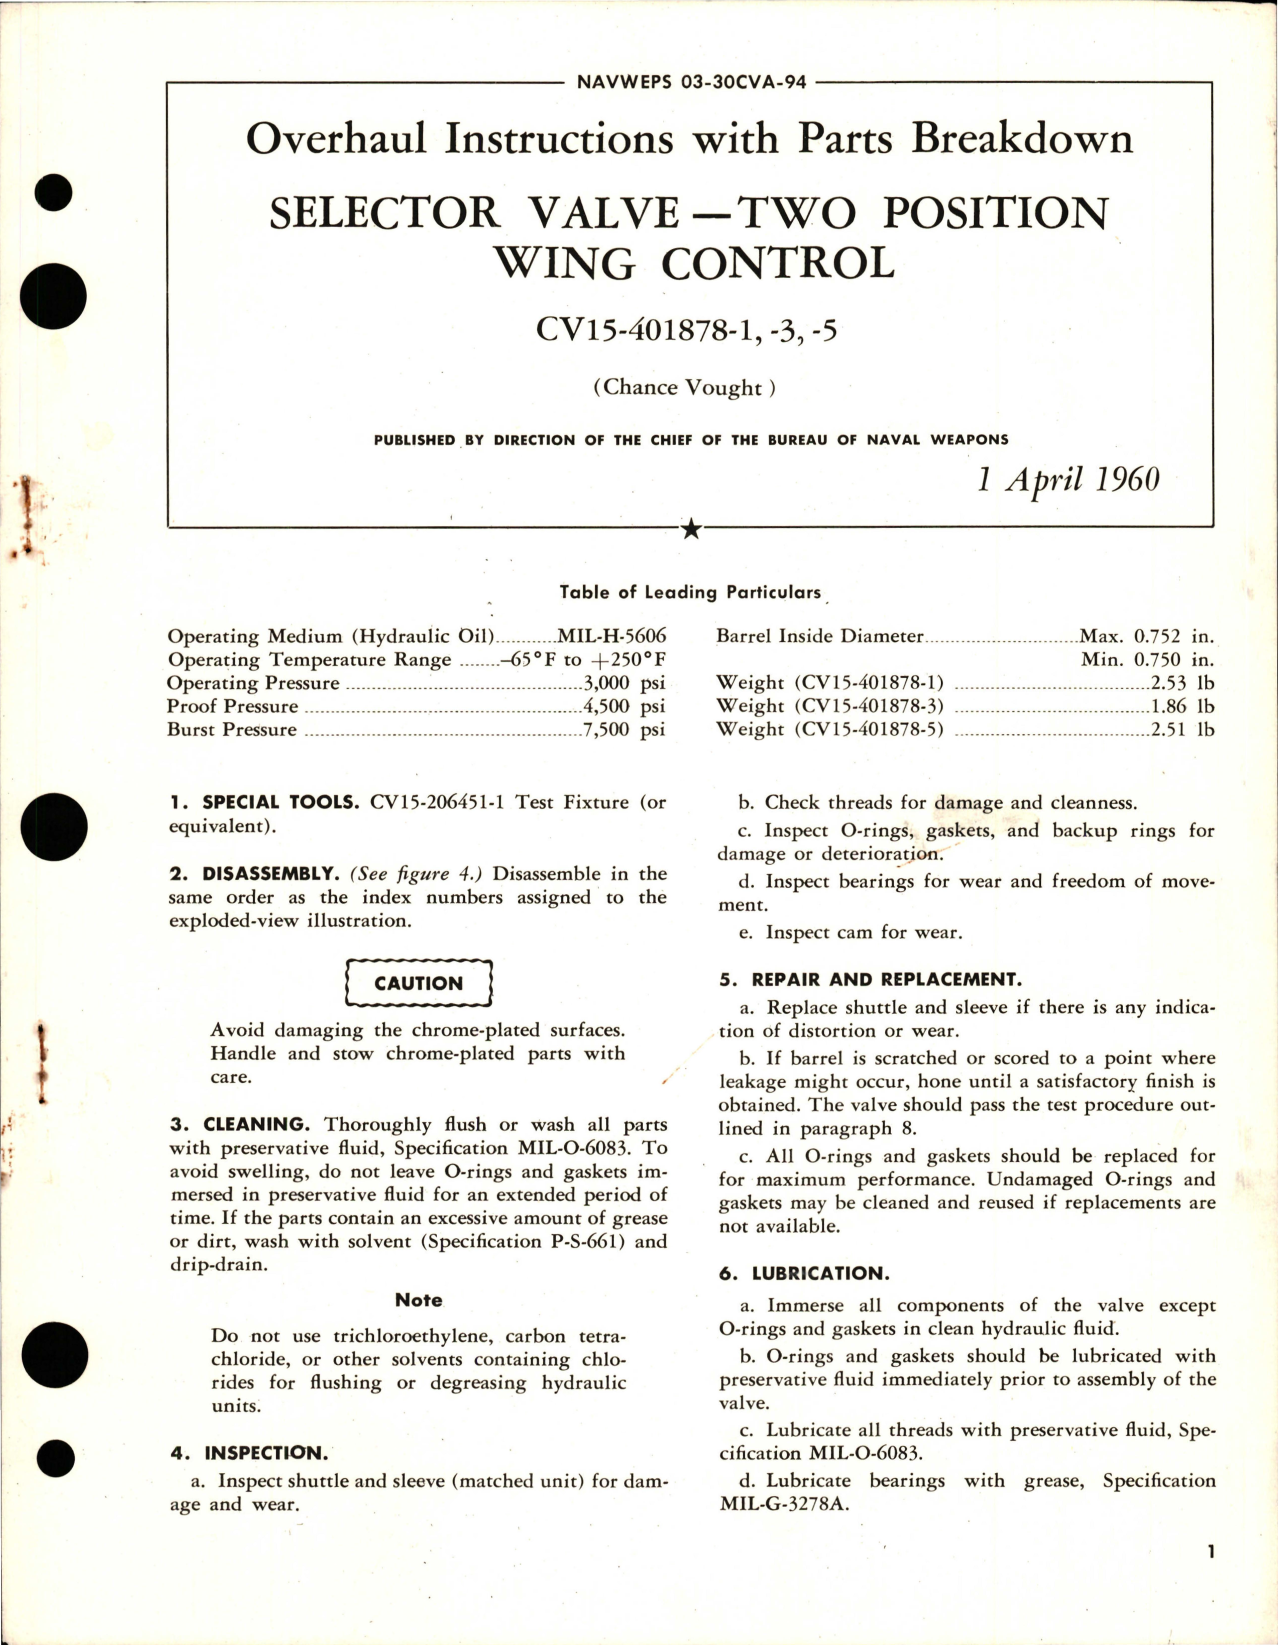 Sample page 1 from AirCorps Library document: Overhaul Instructions with Parts for Two Position Wing Control Selector Valve - CV15-401878-1, CV15-401878-3, CV15-401878-5